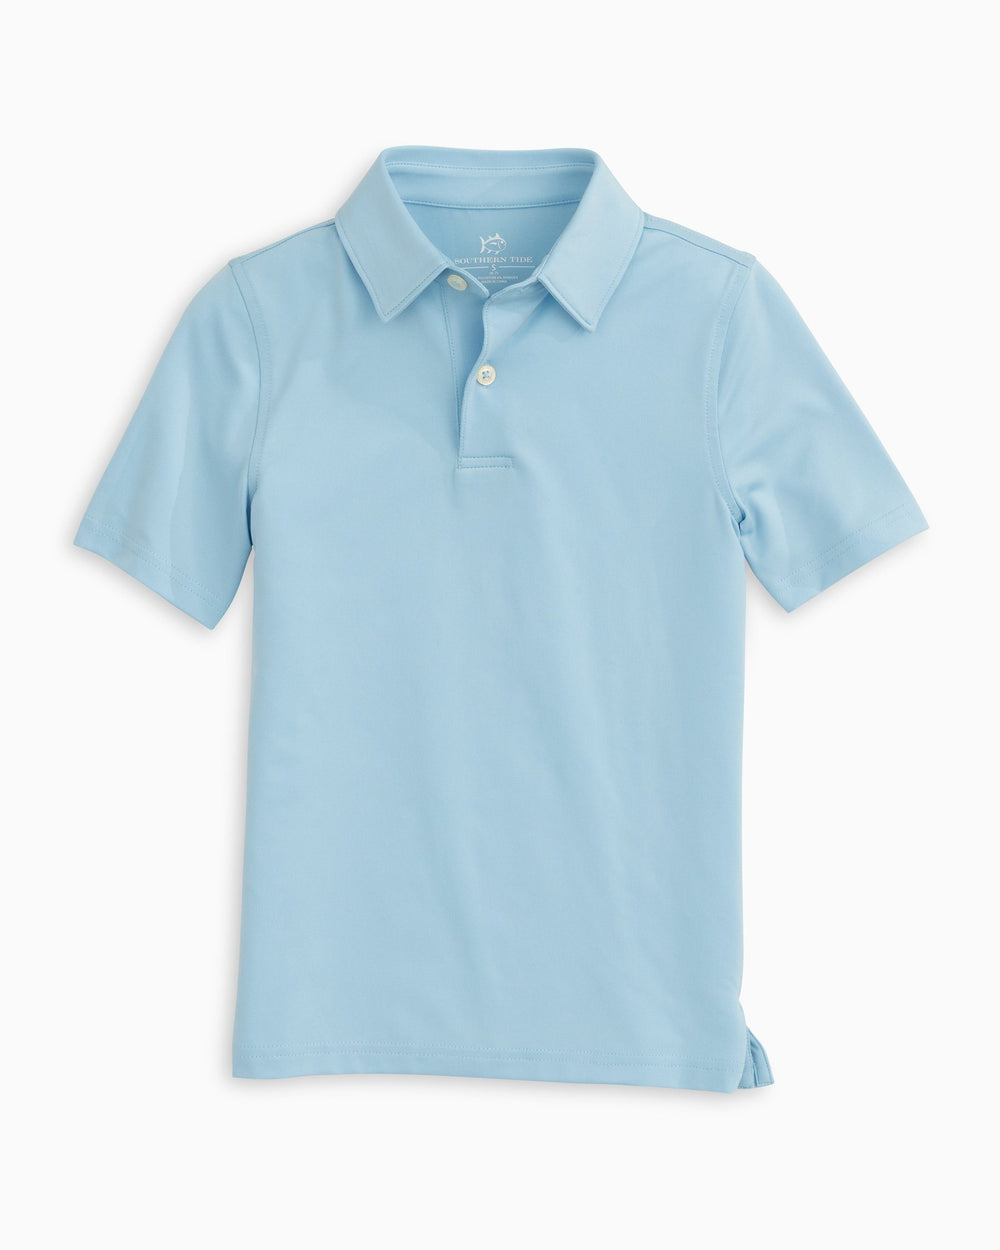 The front view of the Boys Driver Performance Polo Shirt by Southern Tide - Sky Blue